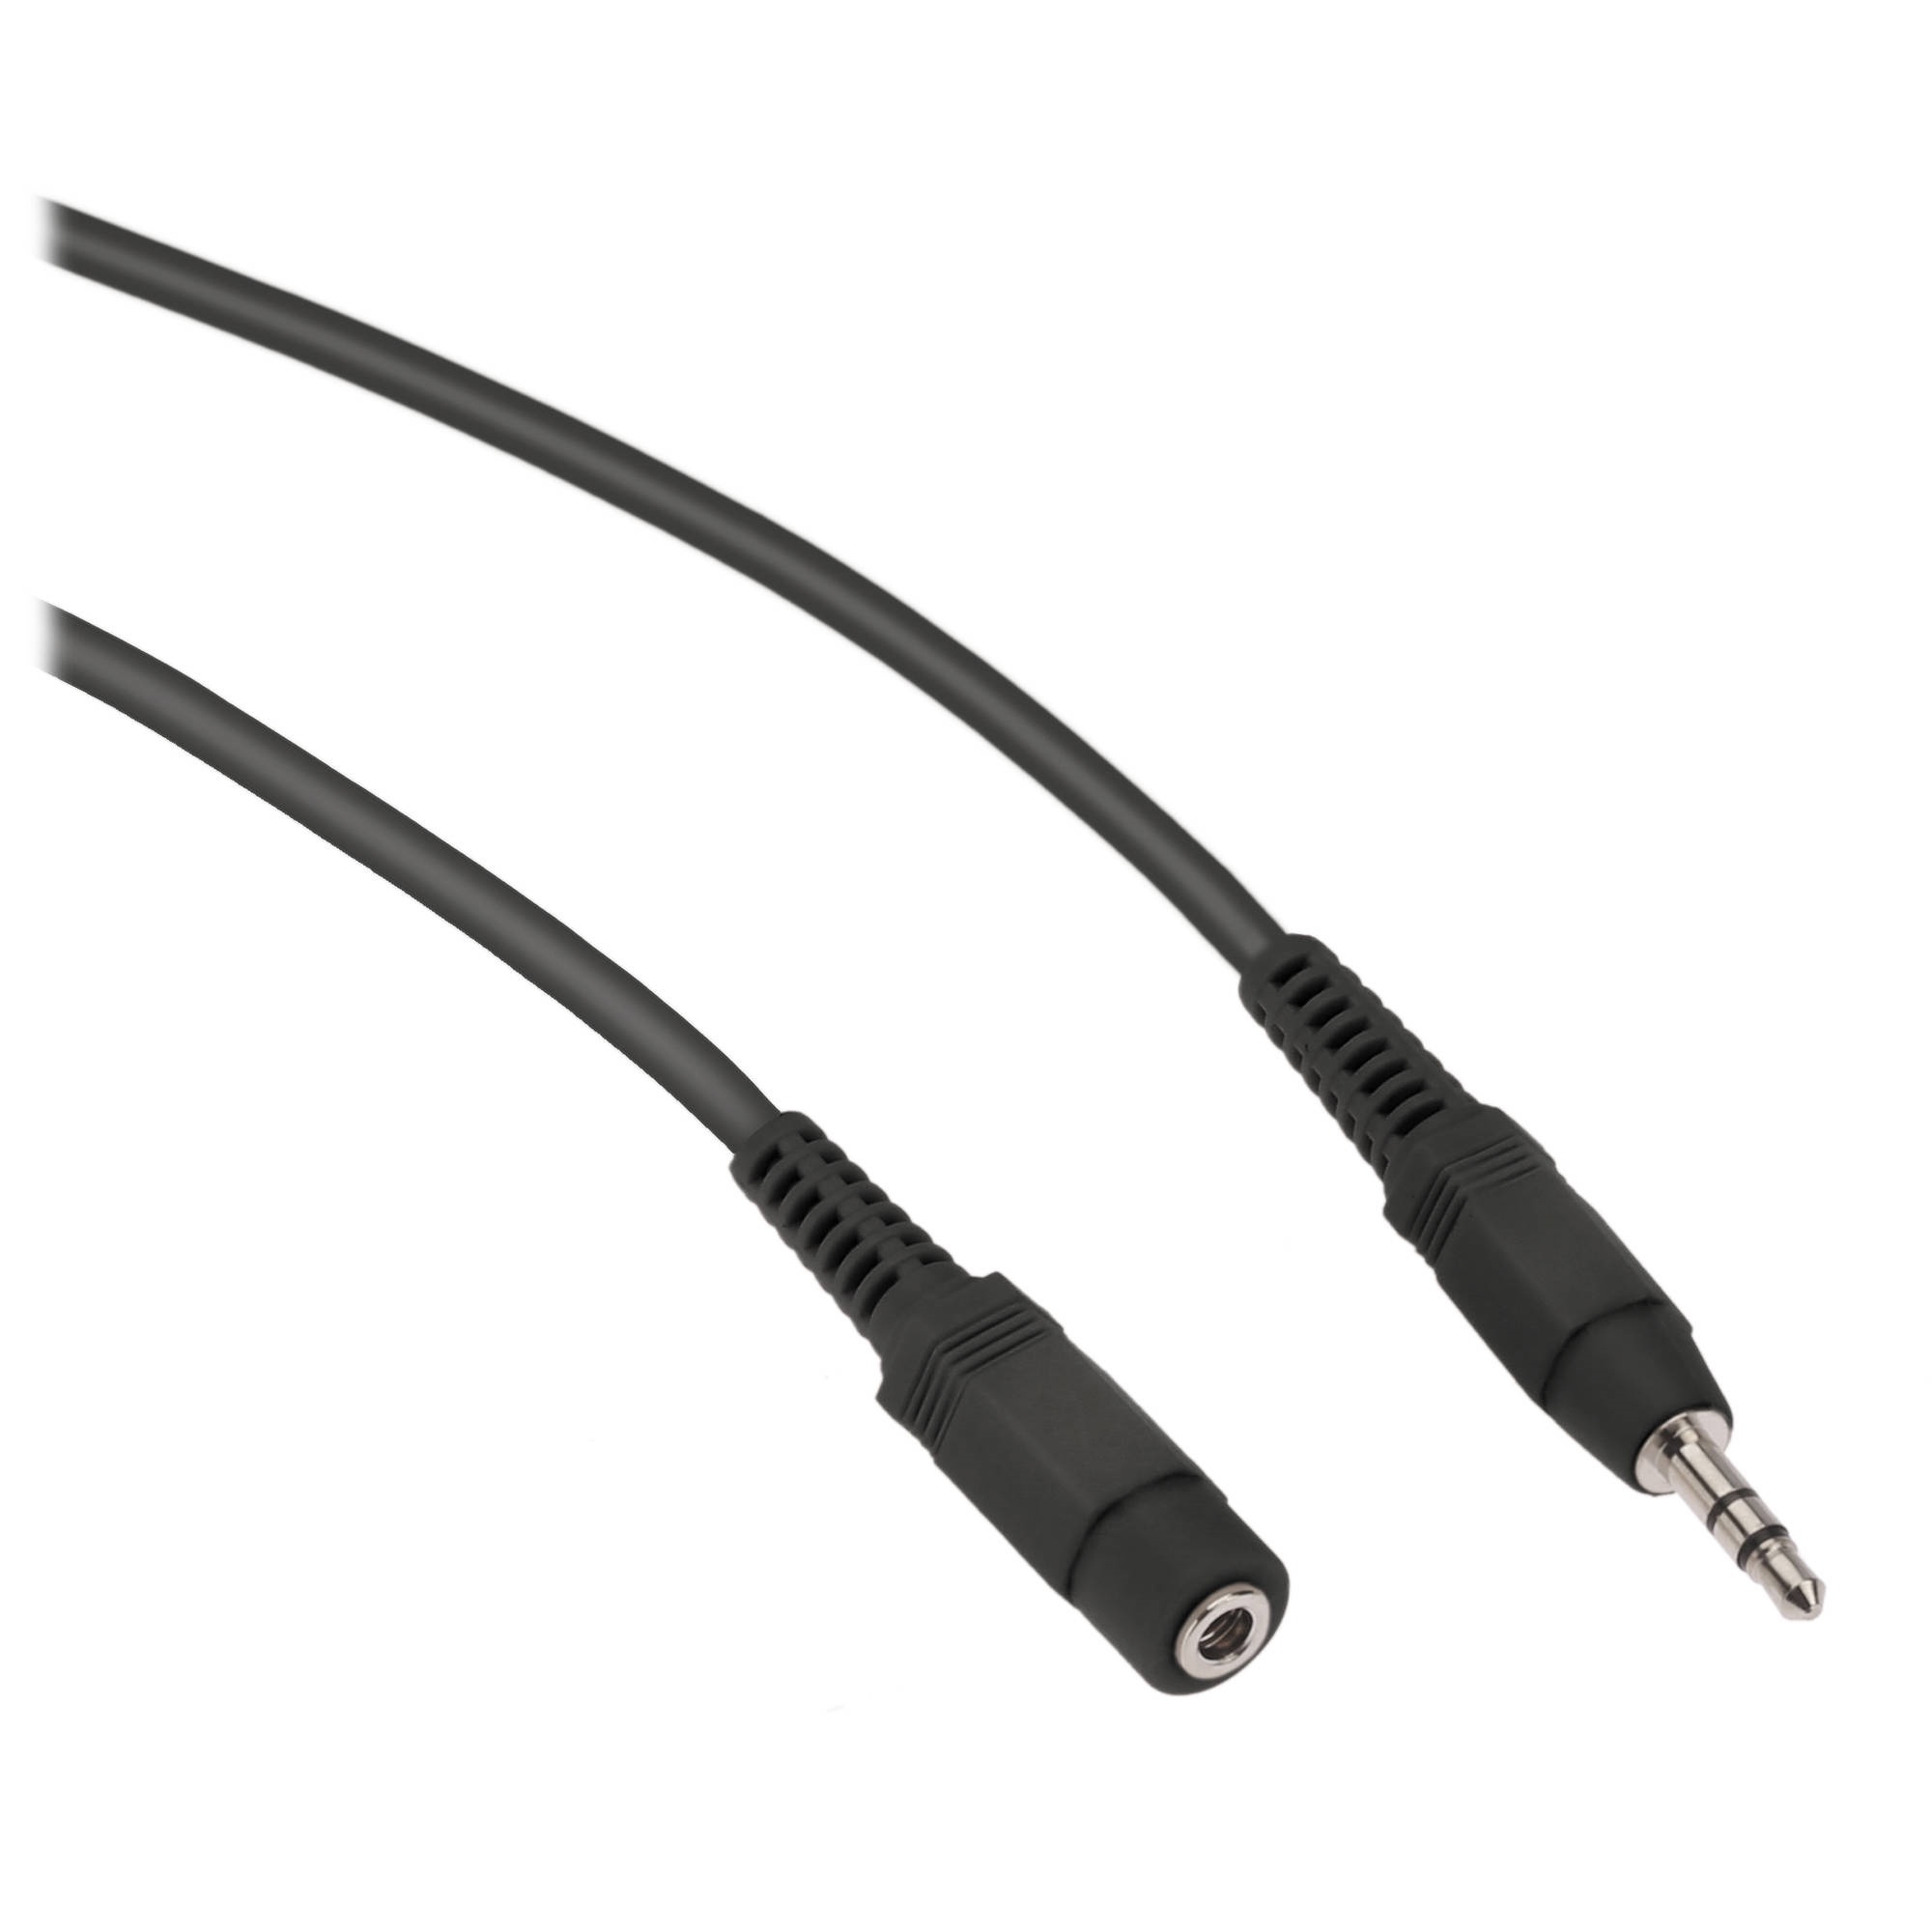 Pearstone Stereo Mini Male to Stereo Mini Female Extension Cable (Black) - 25'